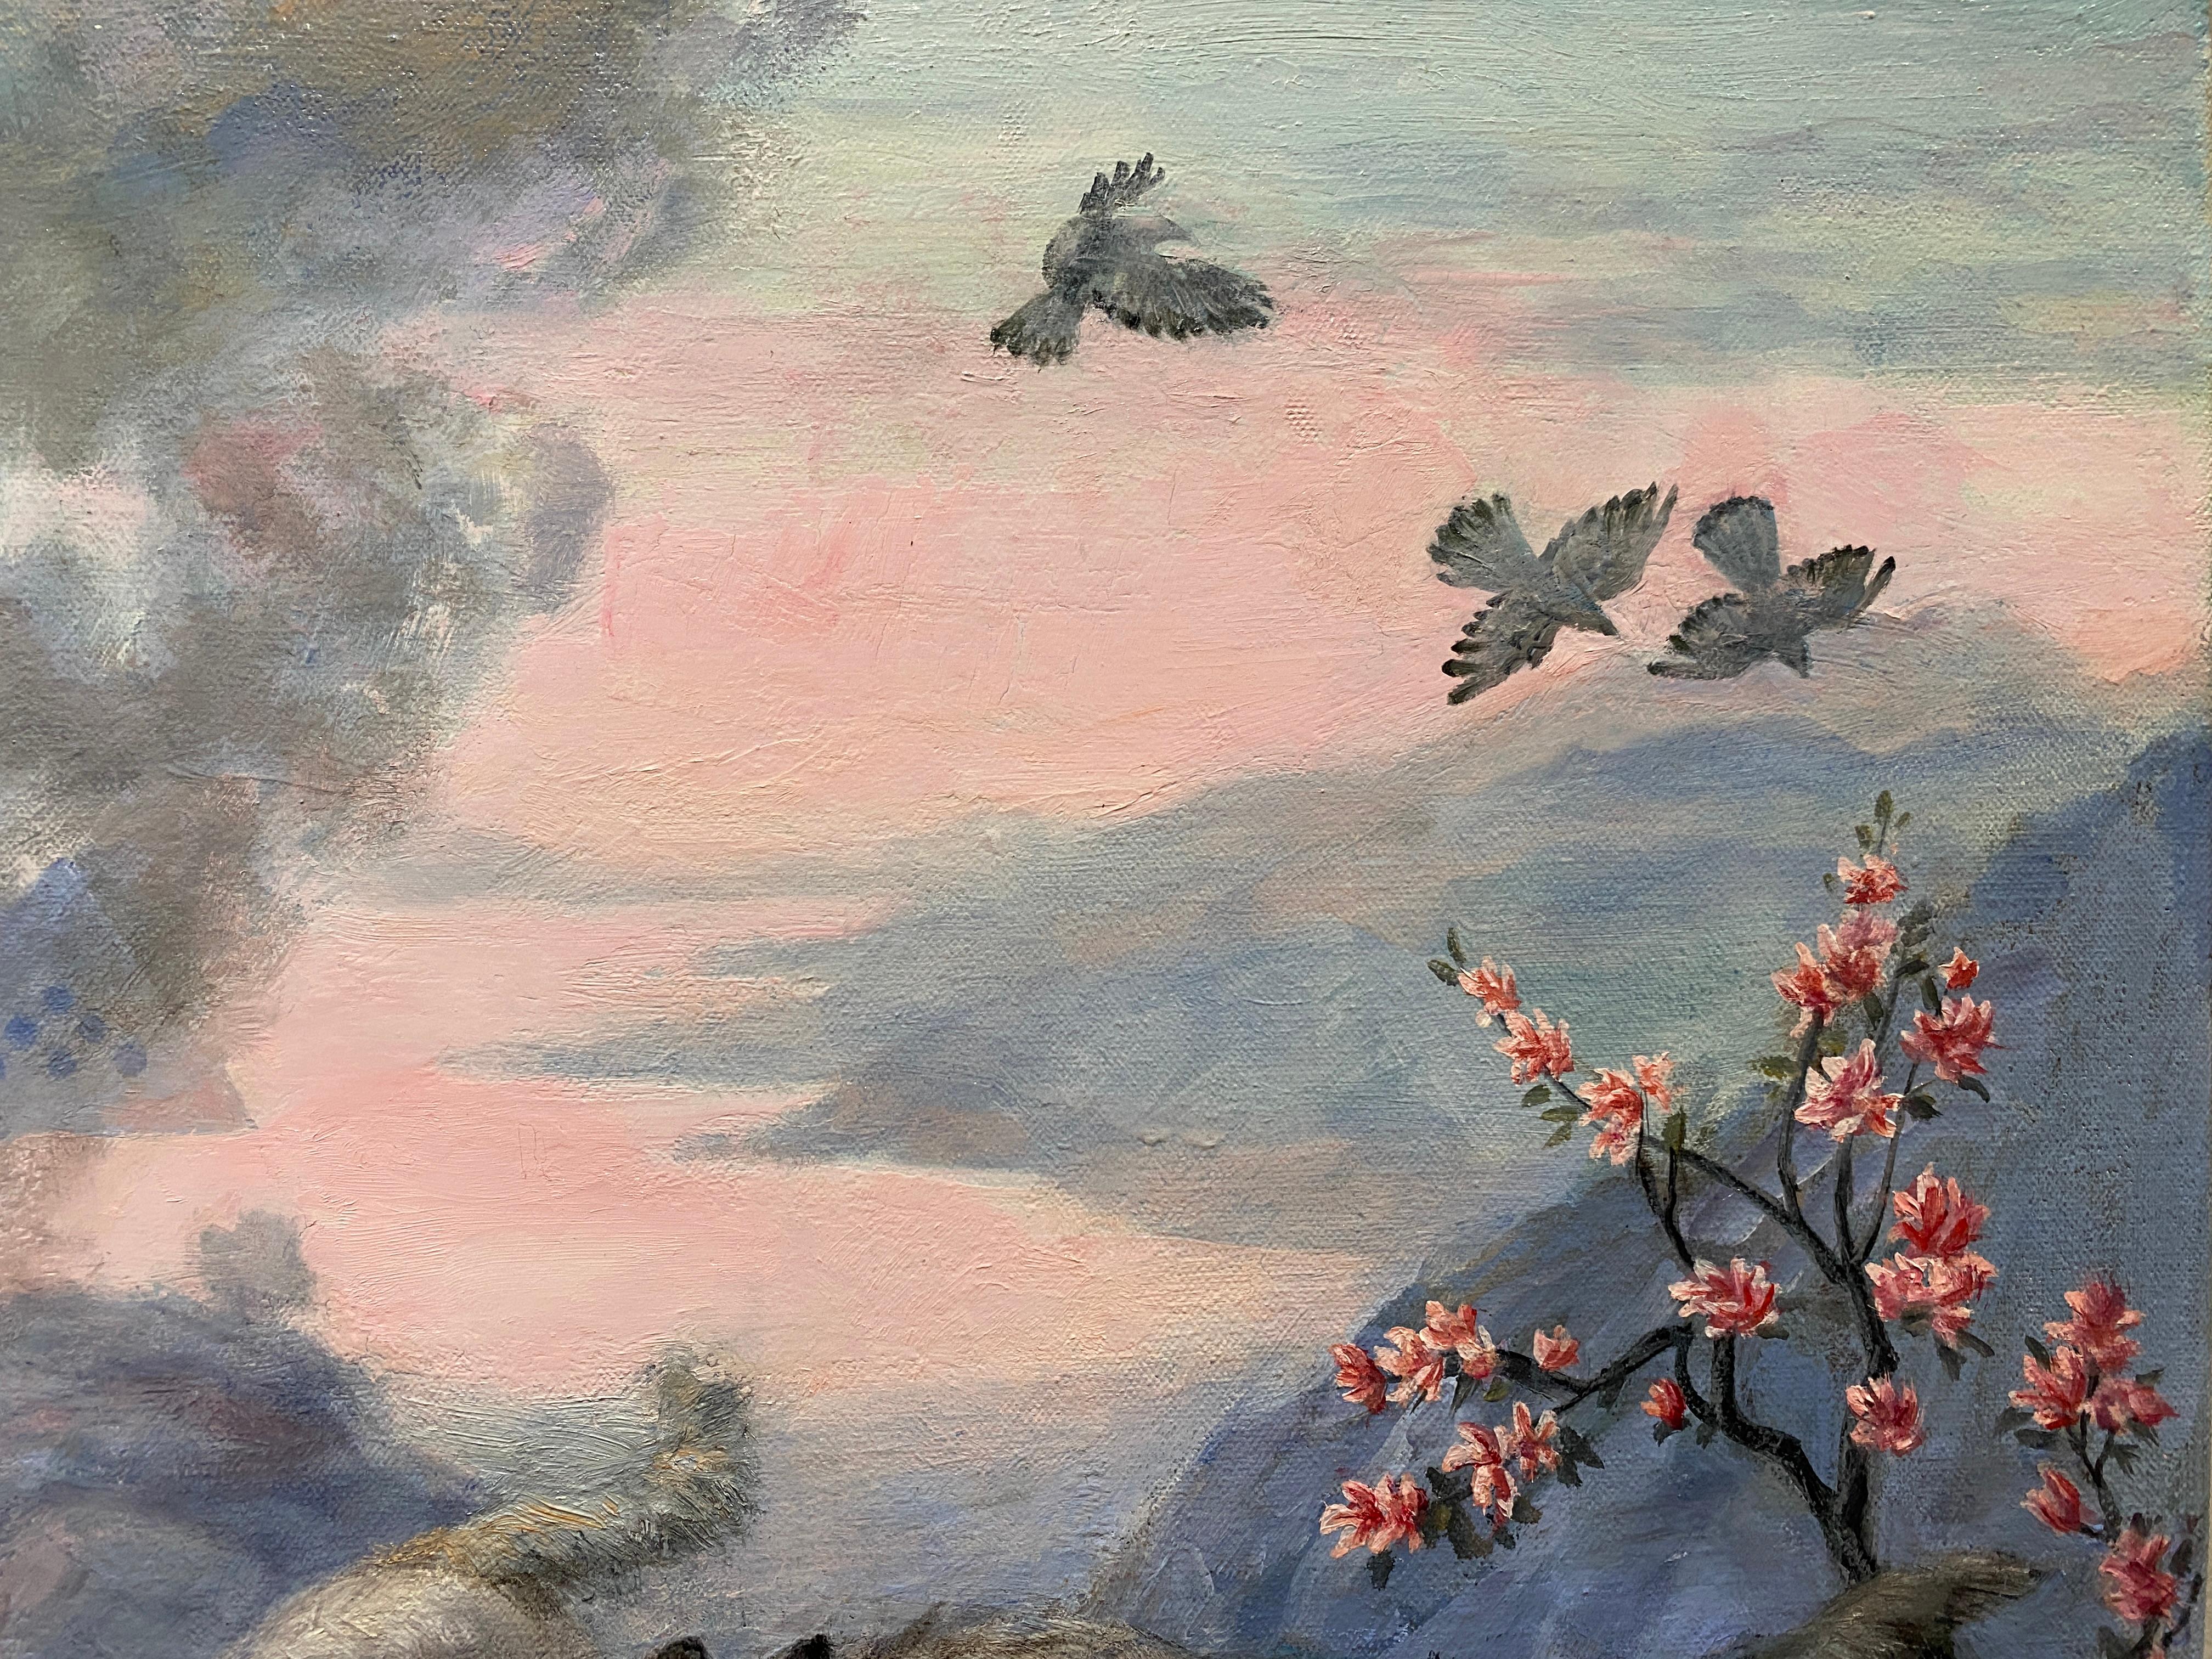 A surrealist oil painting by a classically trained painter. Wolves lope through the composition as birds fly the opposite direction, away from the smoke and flames. The right third of the painting is 'picture perfect:' a cherry blossom in full bloom